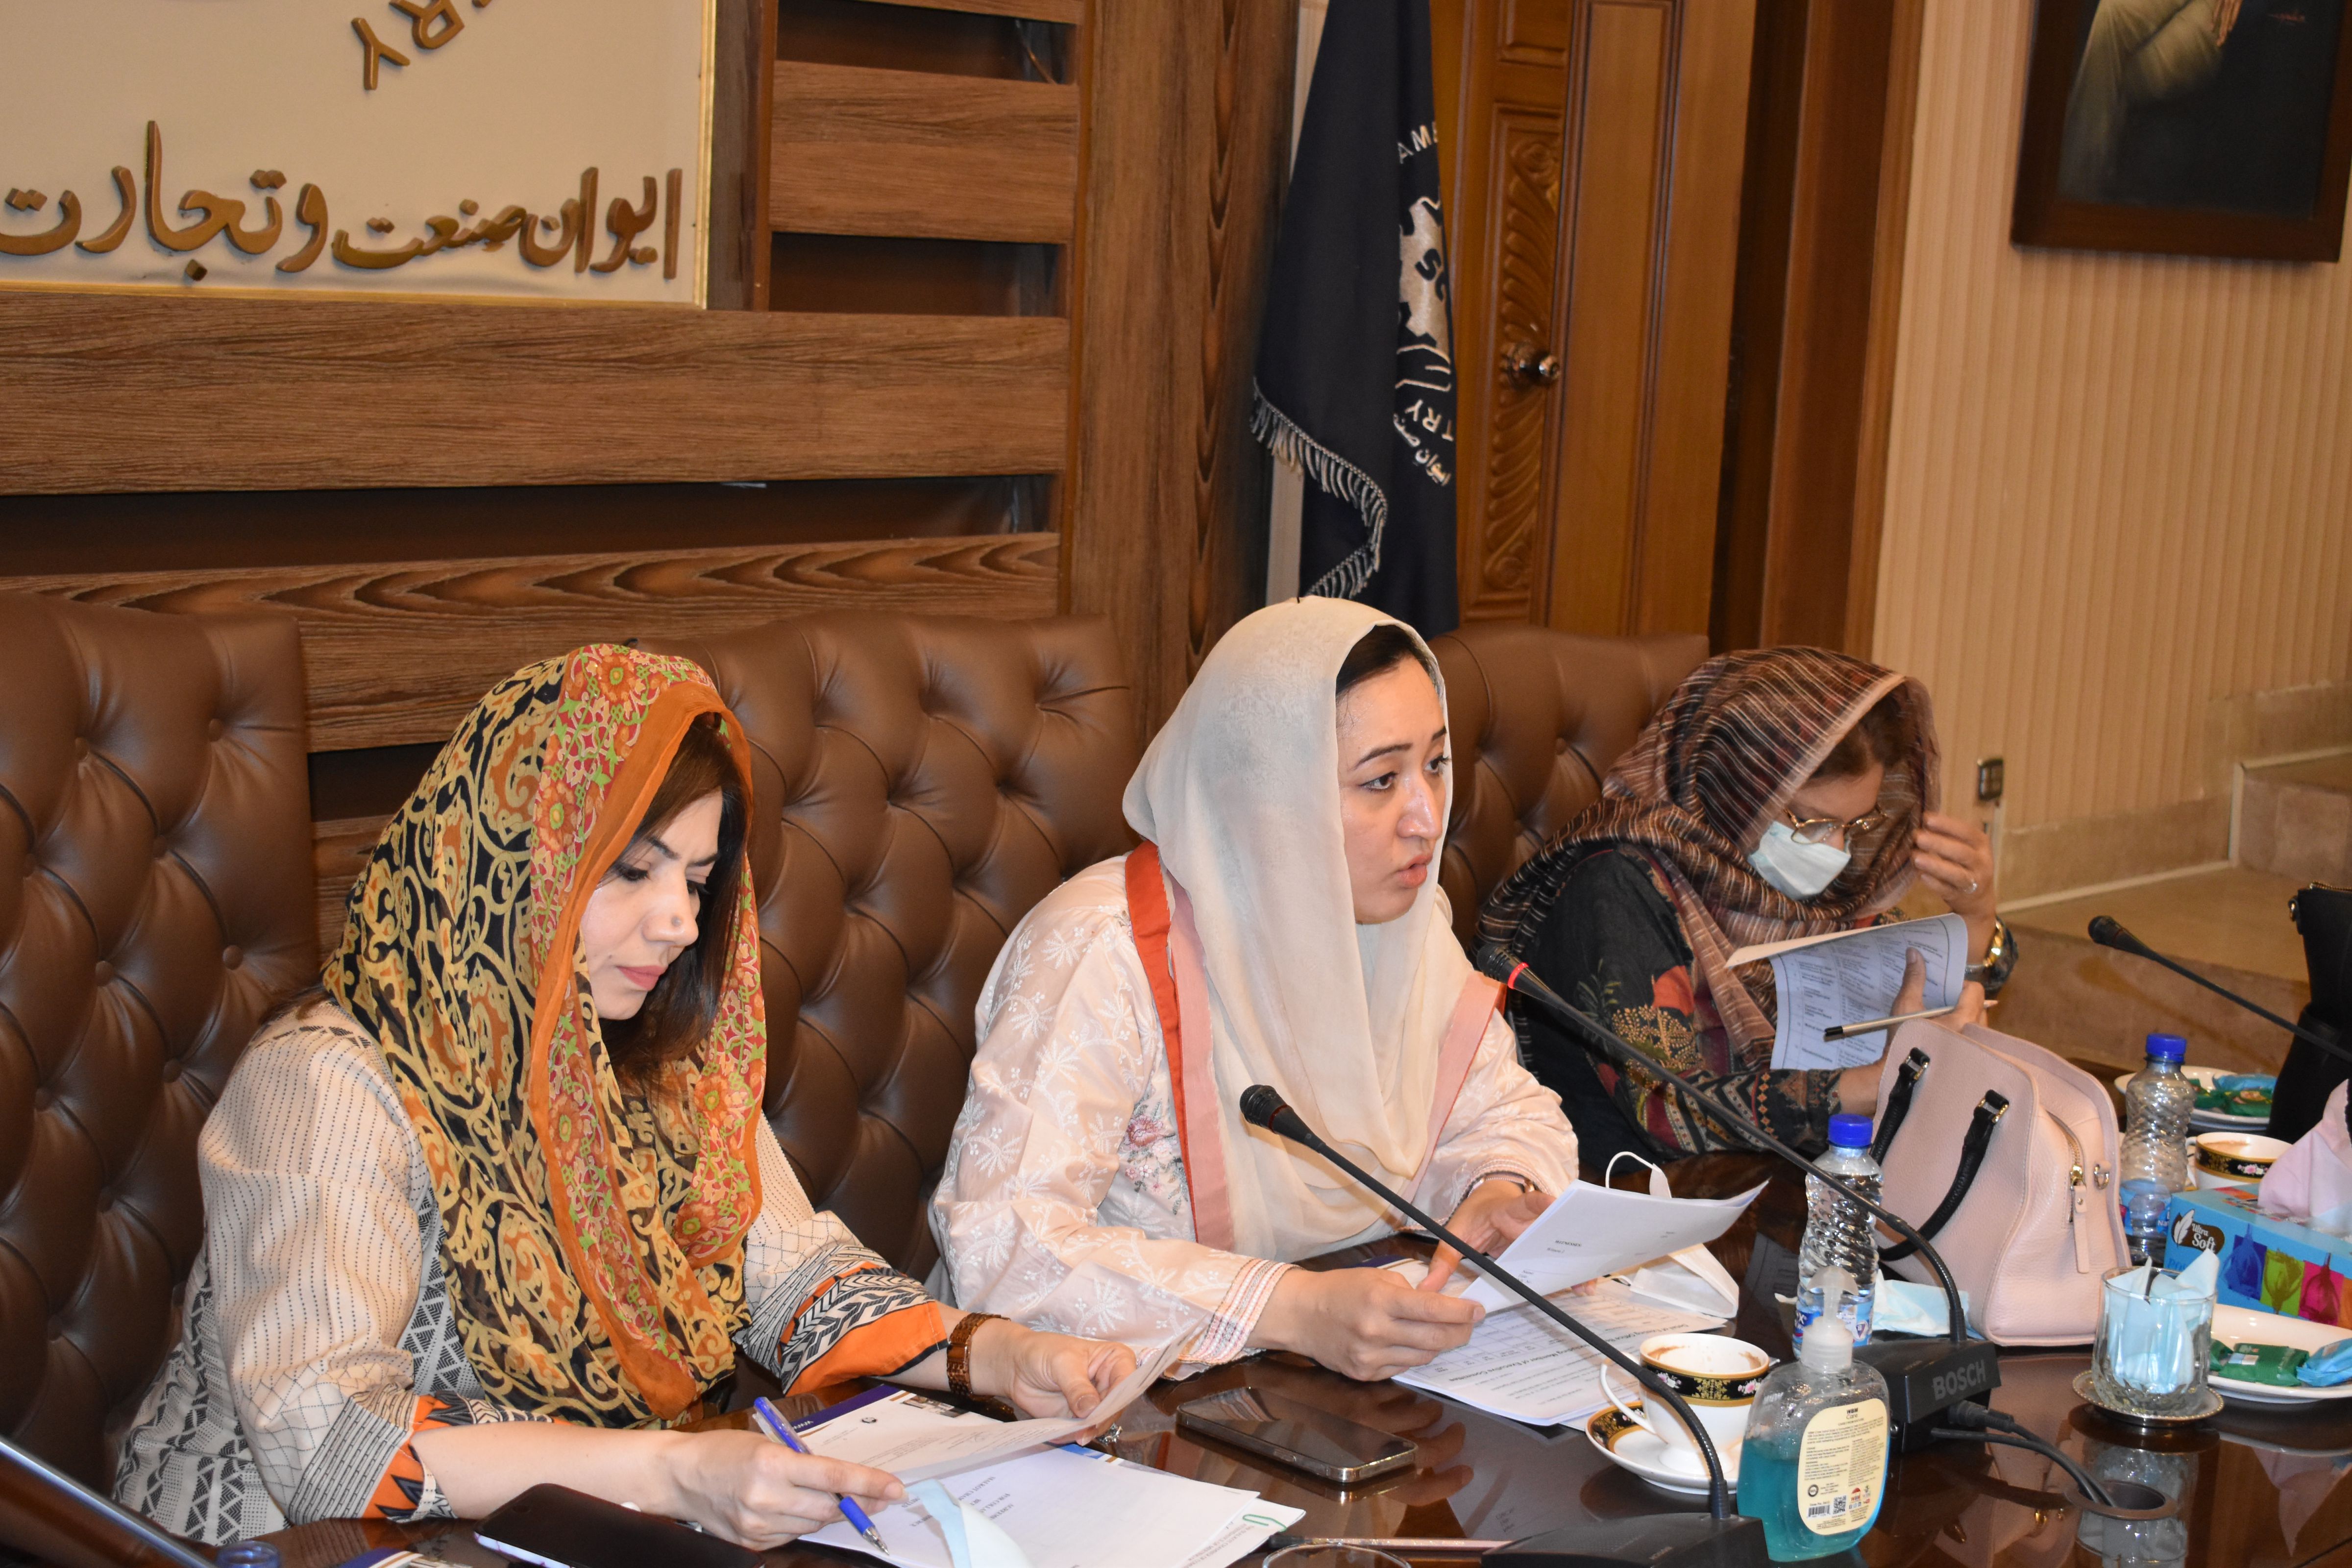 On May 27, 2021, A meeting of Departmental Committee on Women Entrepreneurs was held at SCCI.